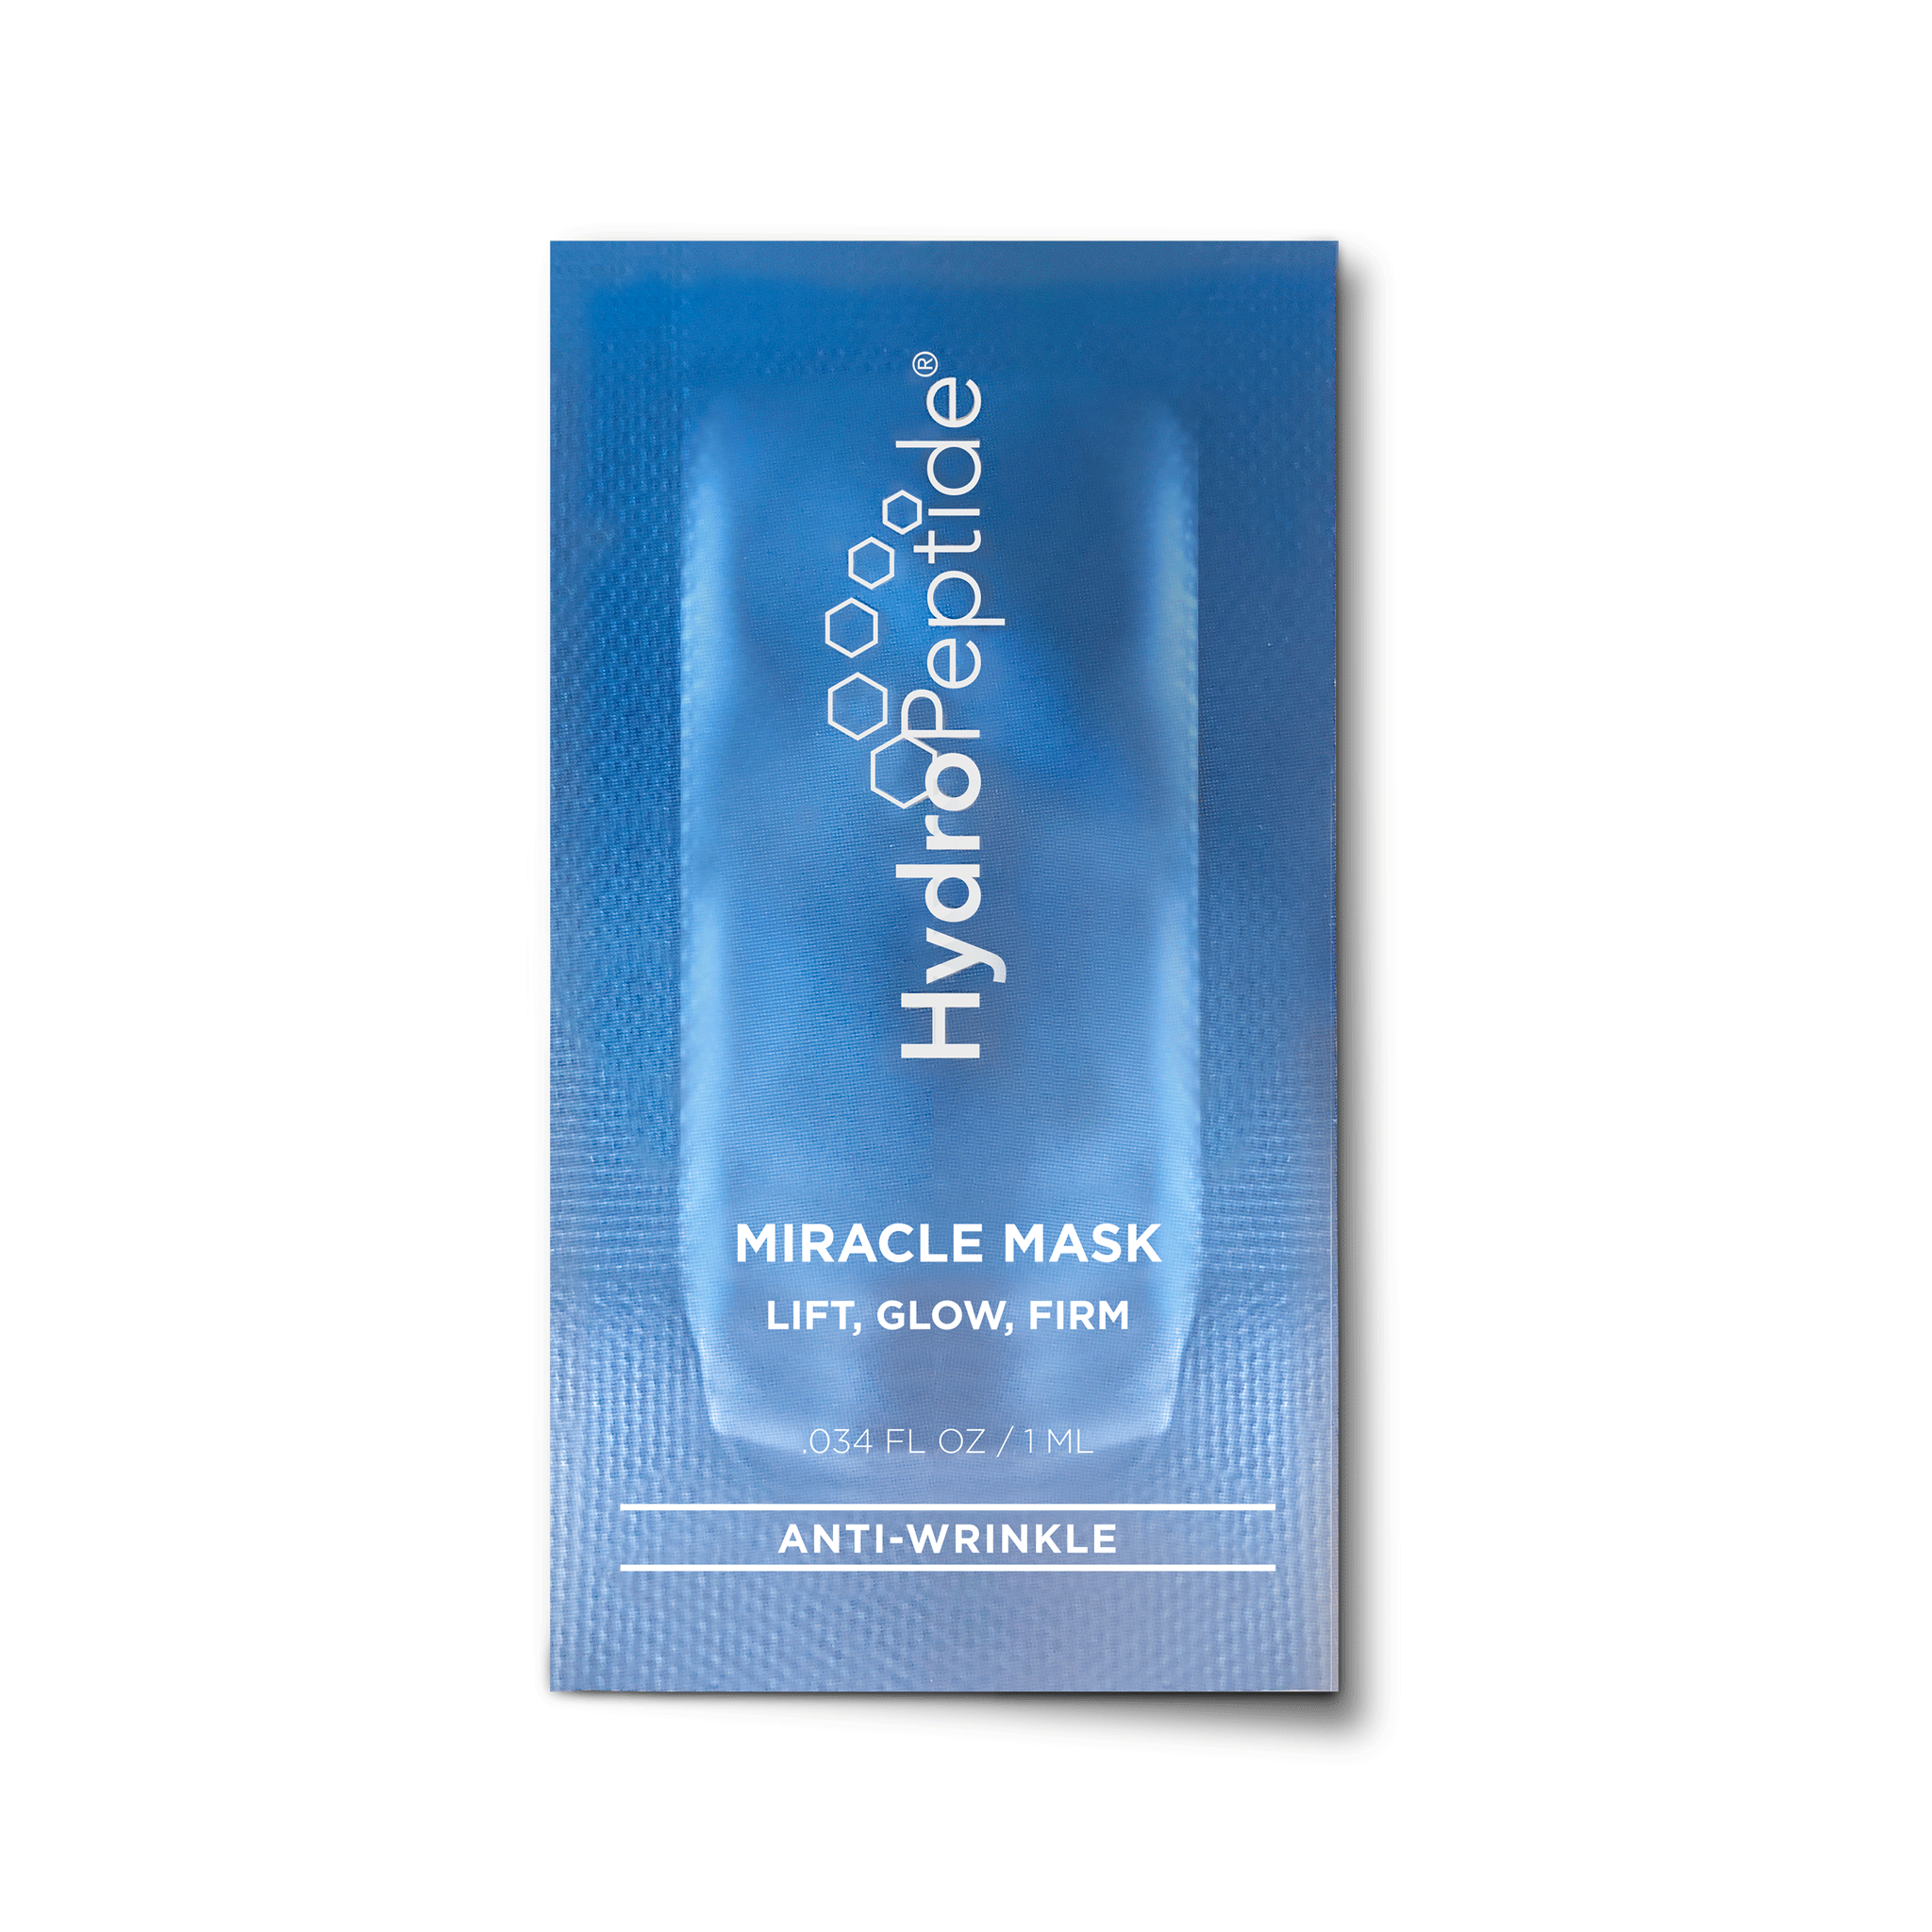 HydroPeptide Miracle Mask Sample Packs